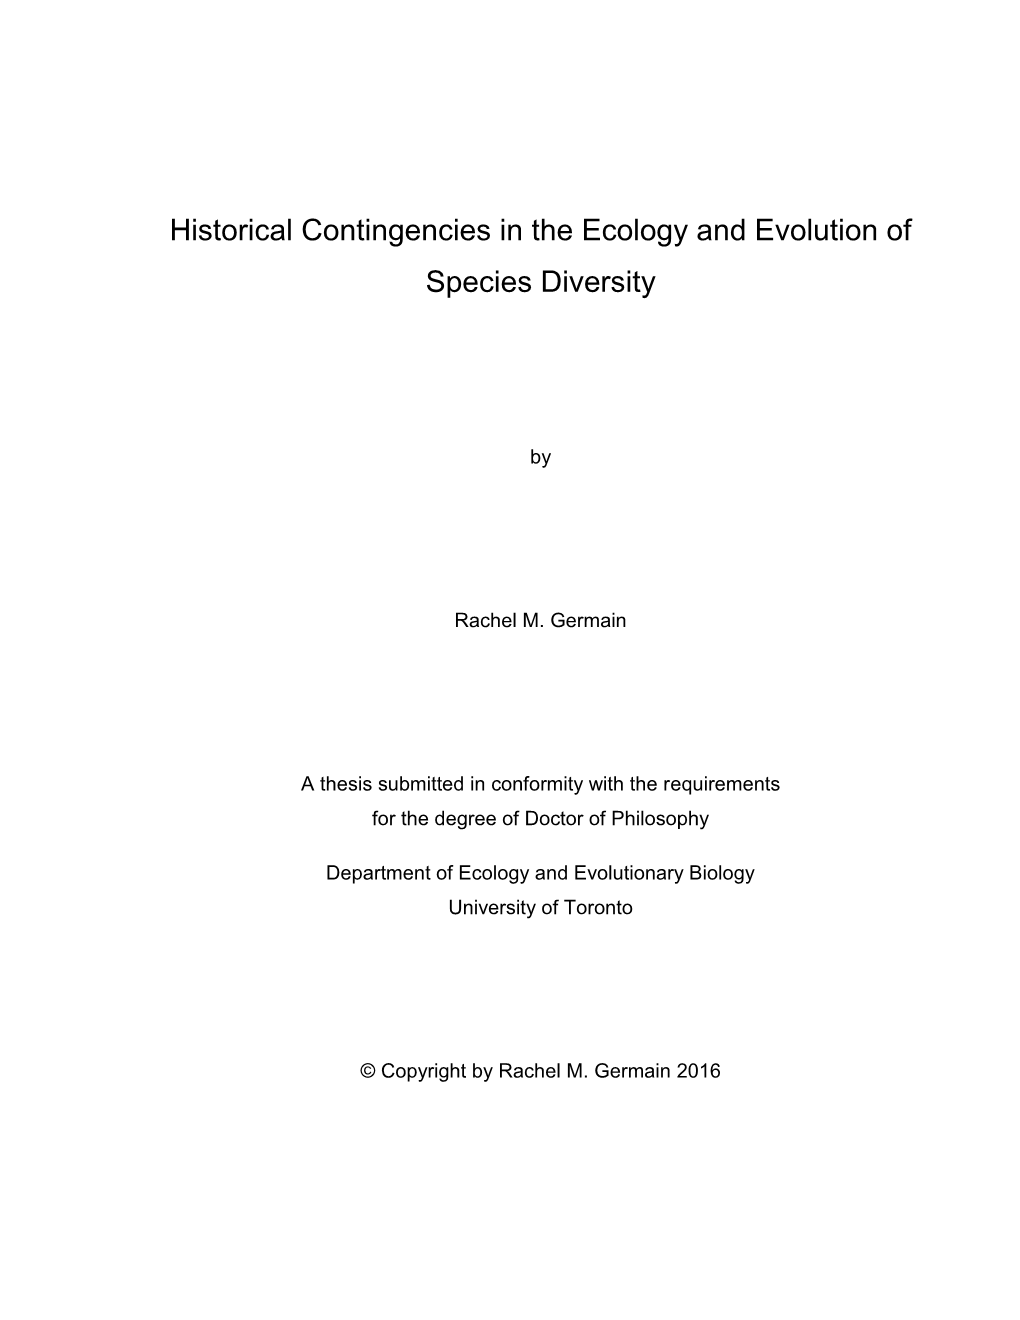 Historical Contingencies in the Ecology and Evolution of Species Diversity